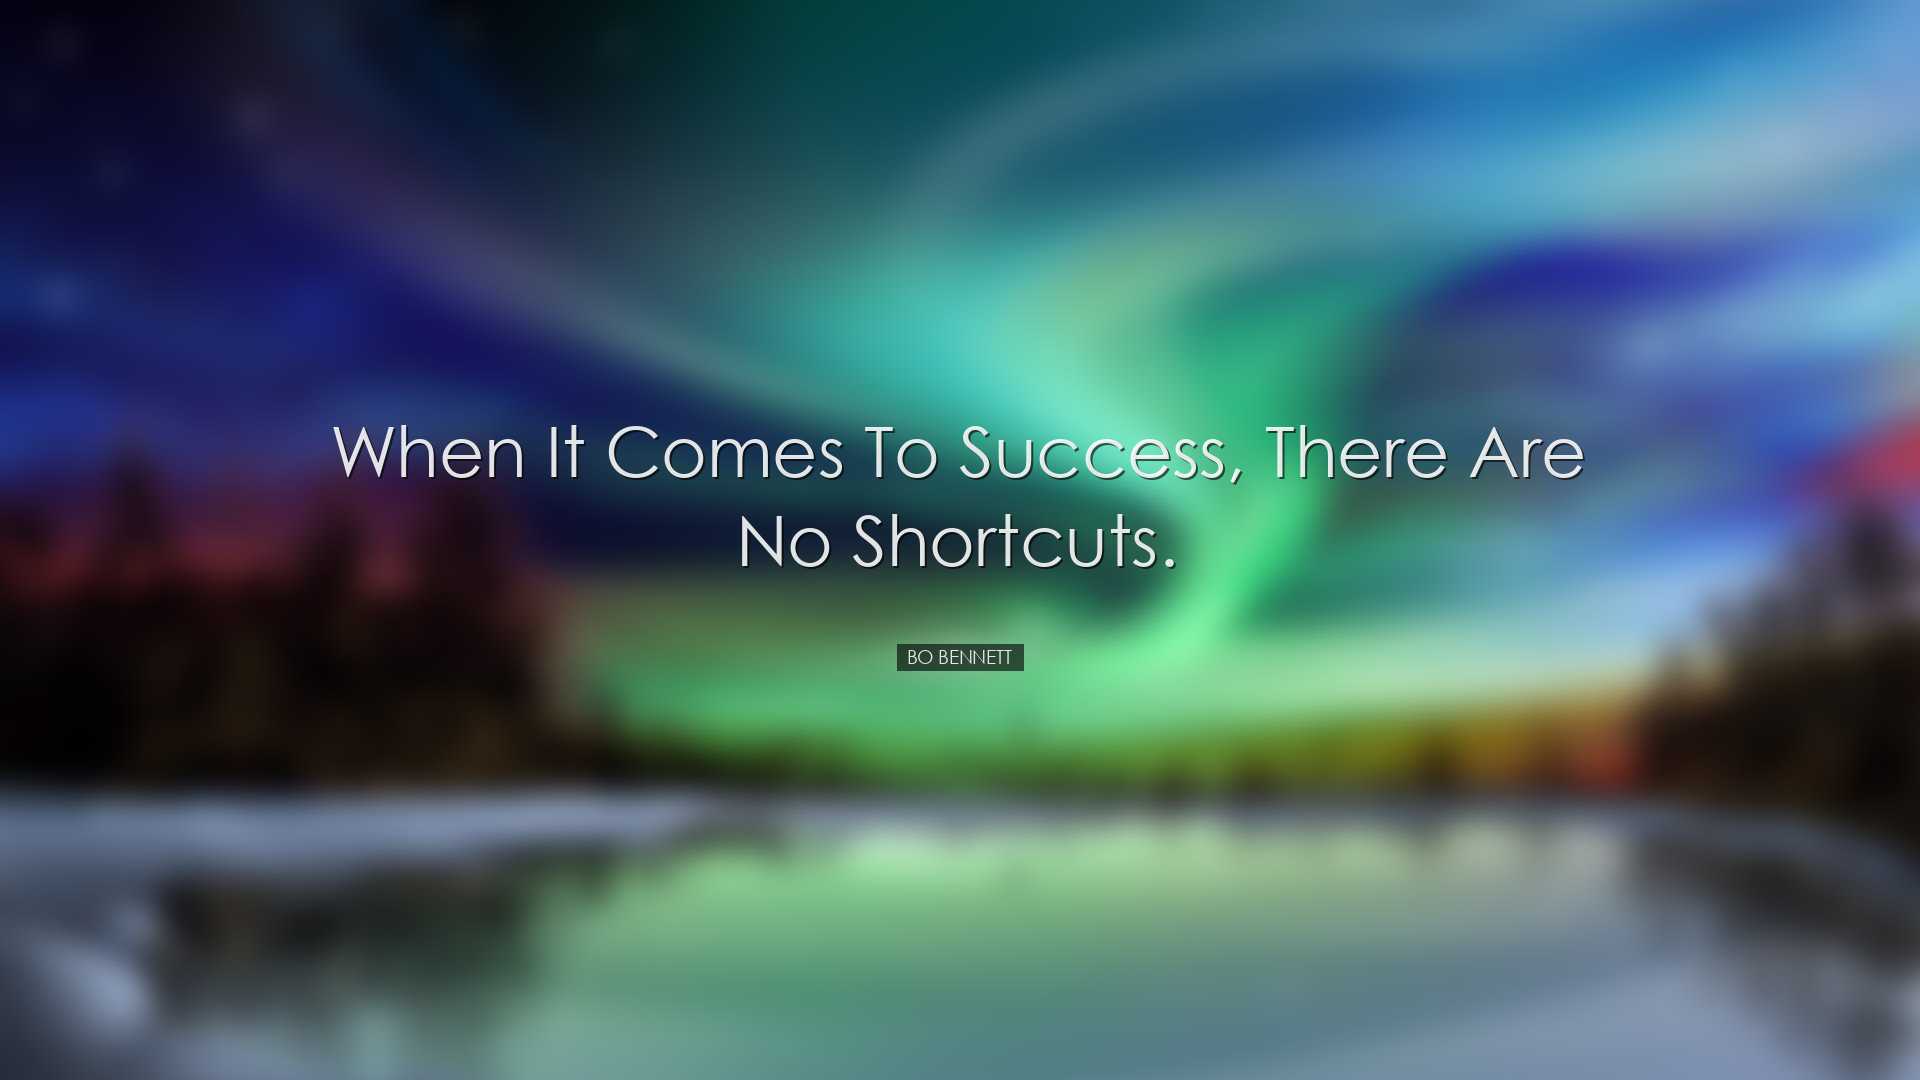 When it comes to success, there are no shortcuts. - Bo Bennett